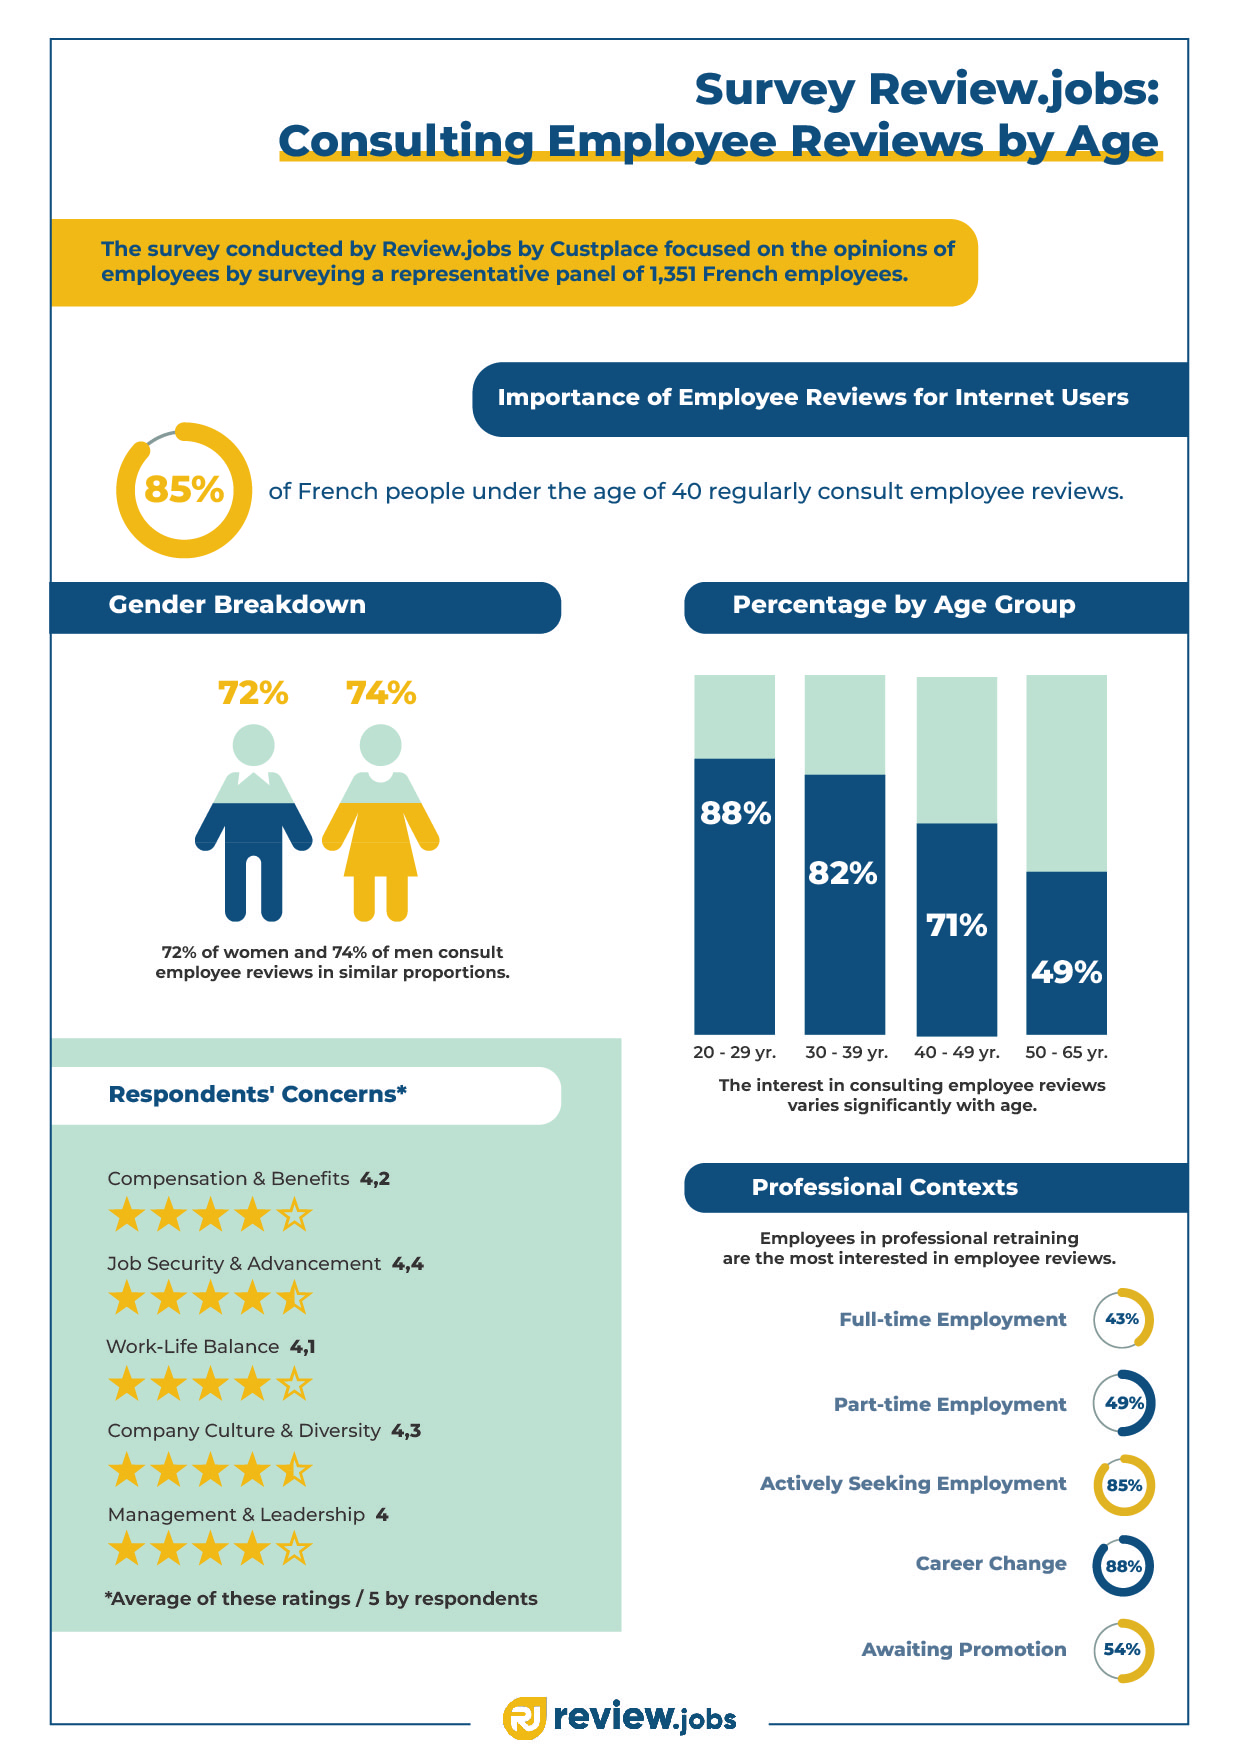 Infographic of the Reviewjobs study displaying statistics on employee reviews by age, with 85% of French people under 40 regularly consulting these reviews. Gender distribution and interest according to the professional context are also presented, along with the main concerns of employees, such as compensation, job security, and work-life balance